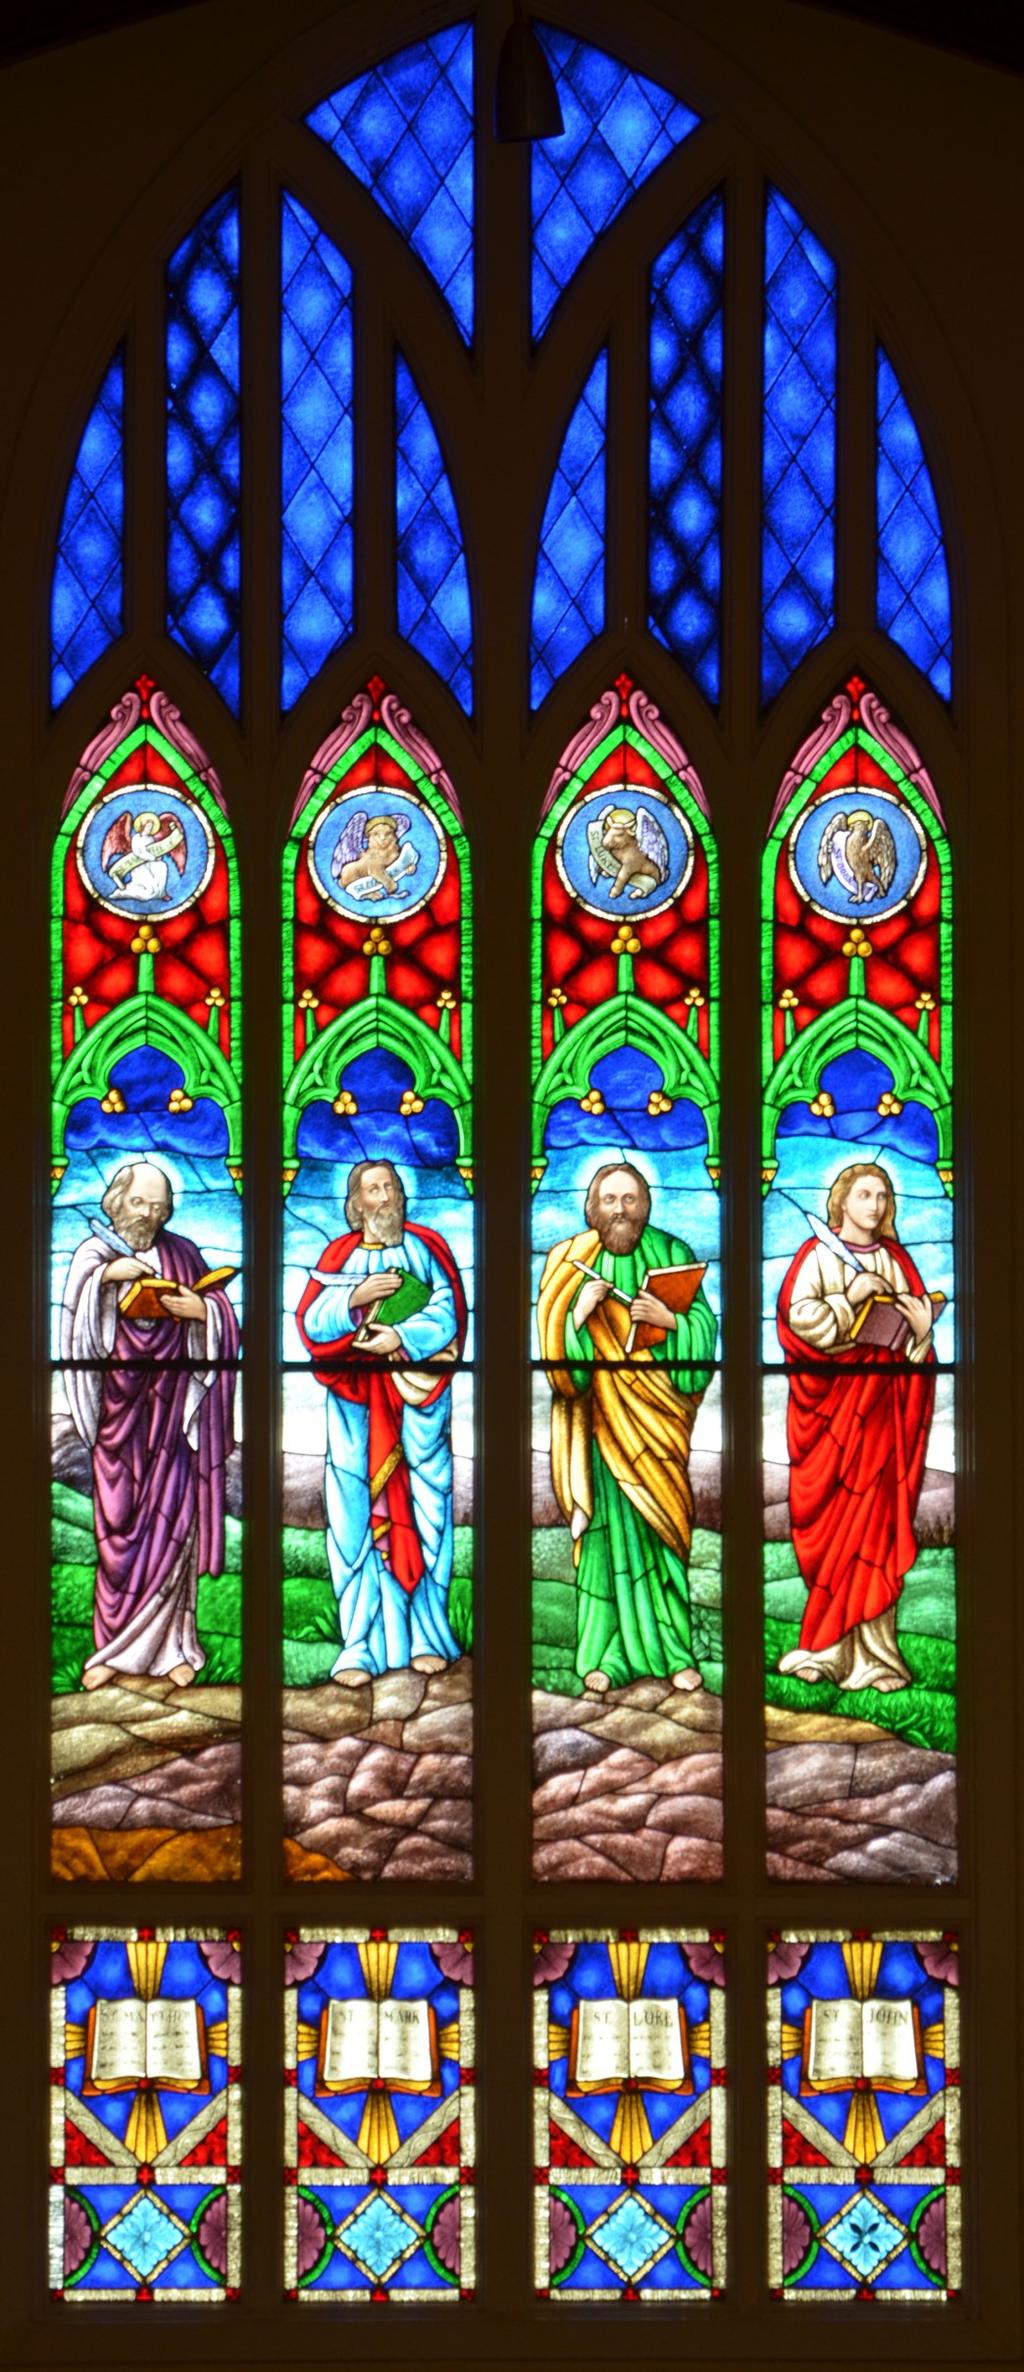 The window in the back of our sanctuary represents Matthew, Mark, Luke and John the authors of the Gospel writings in our Bible.